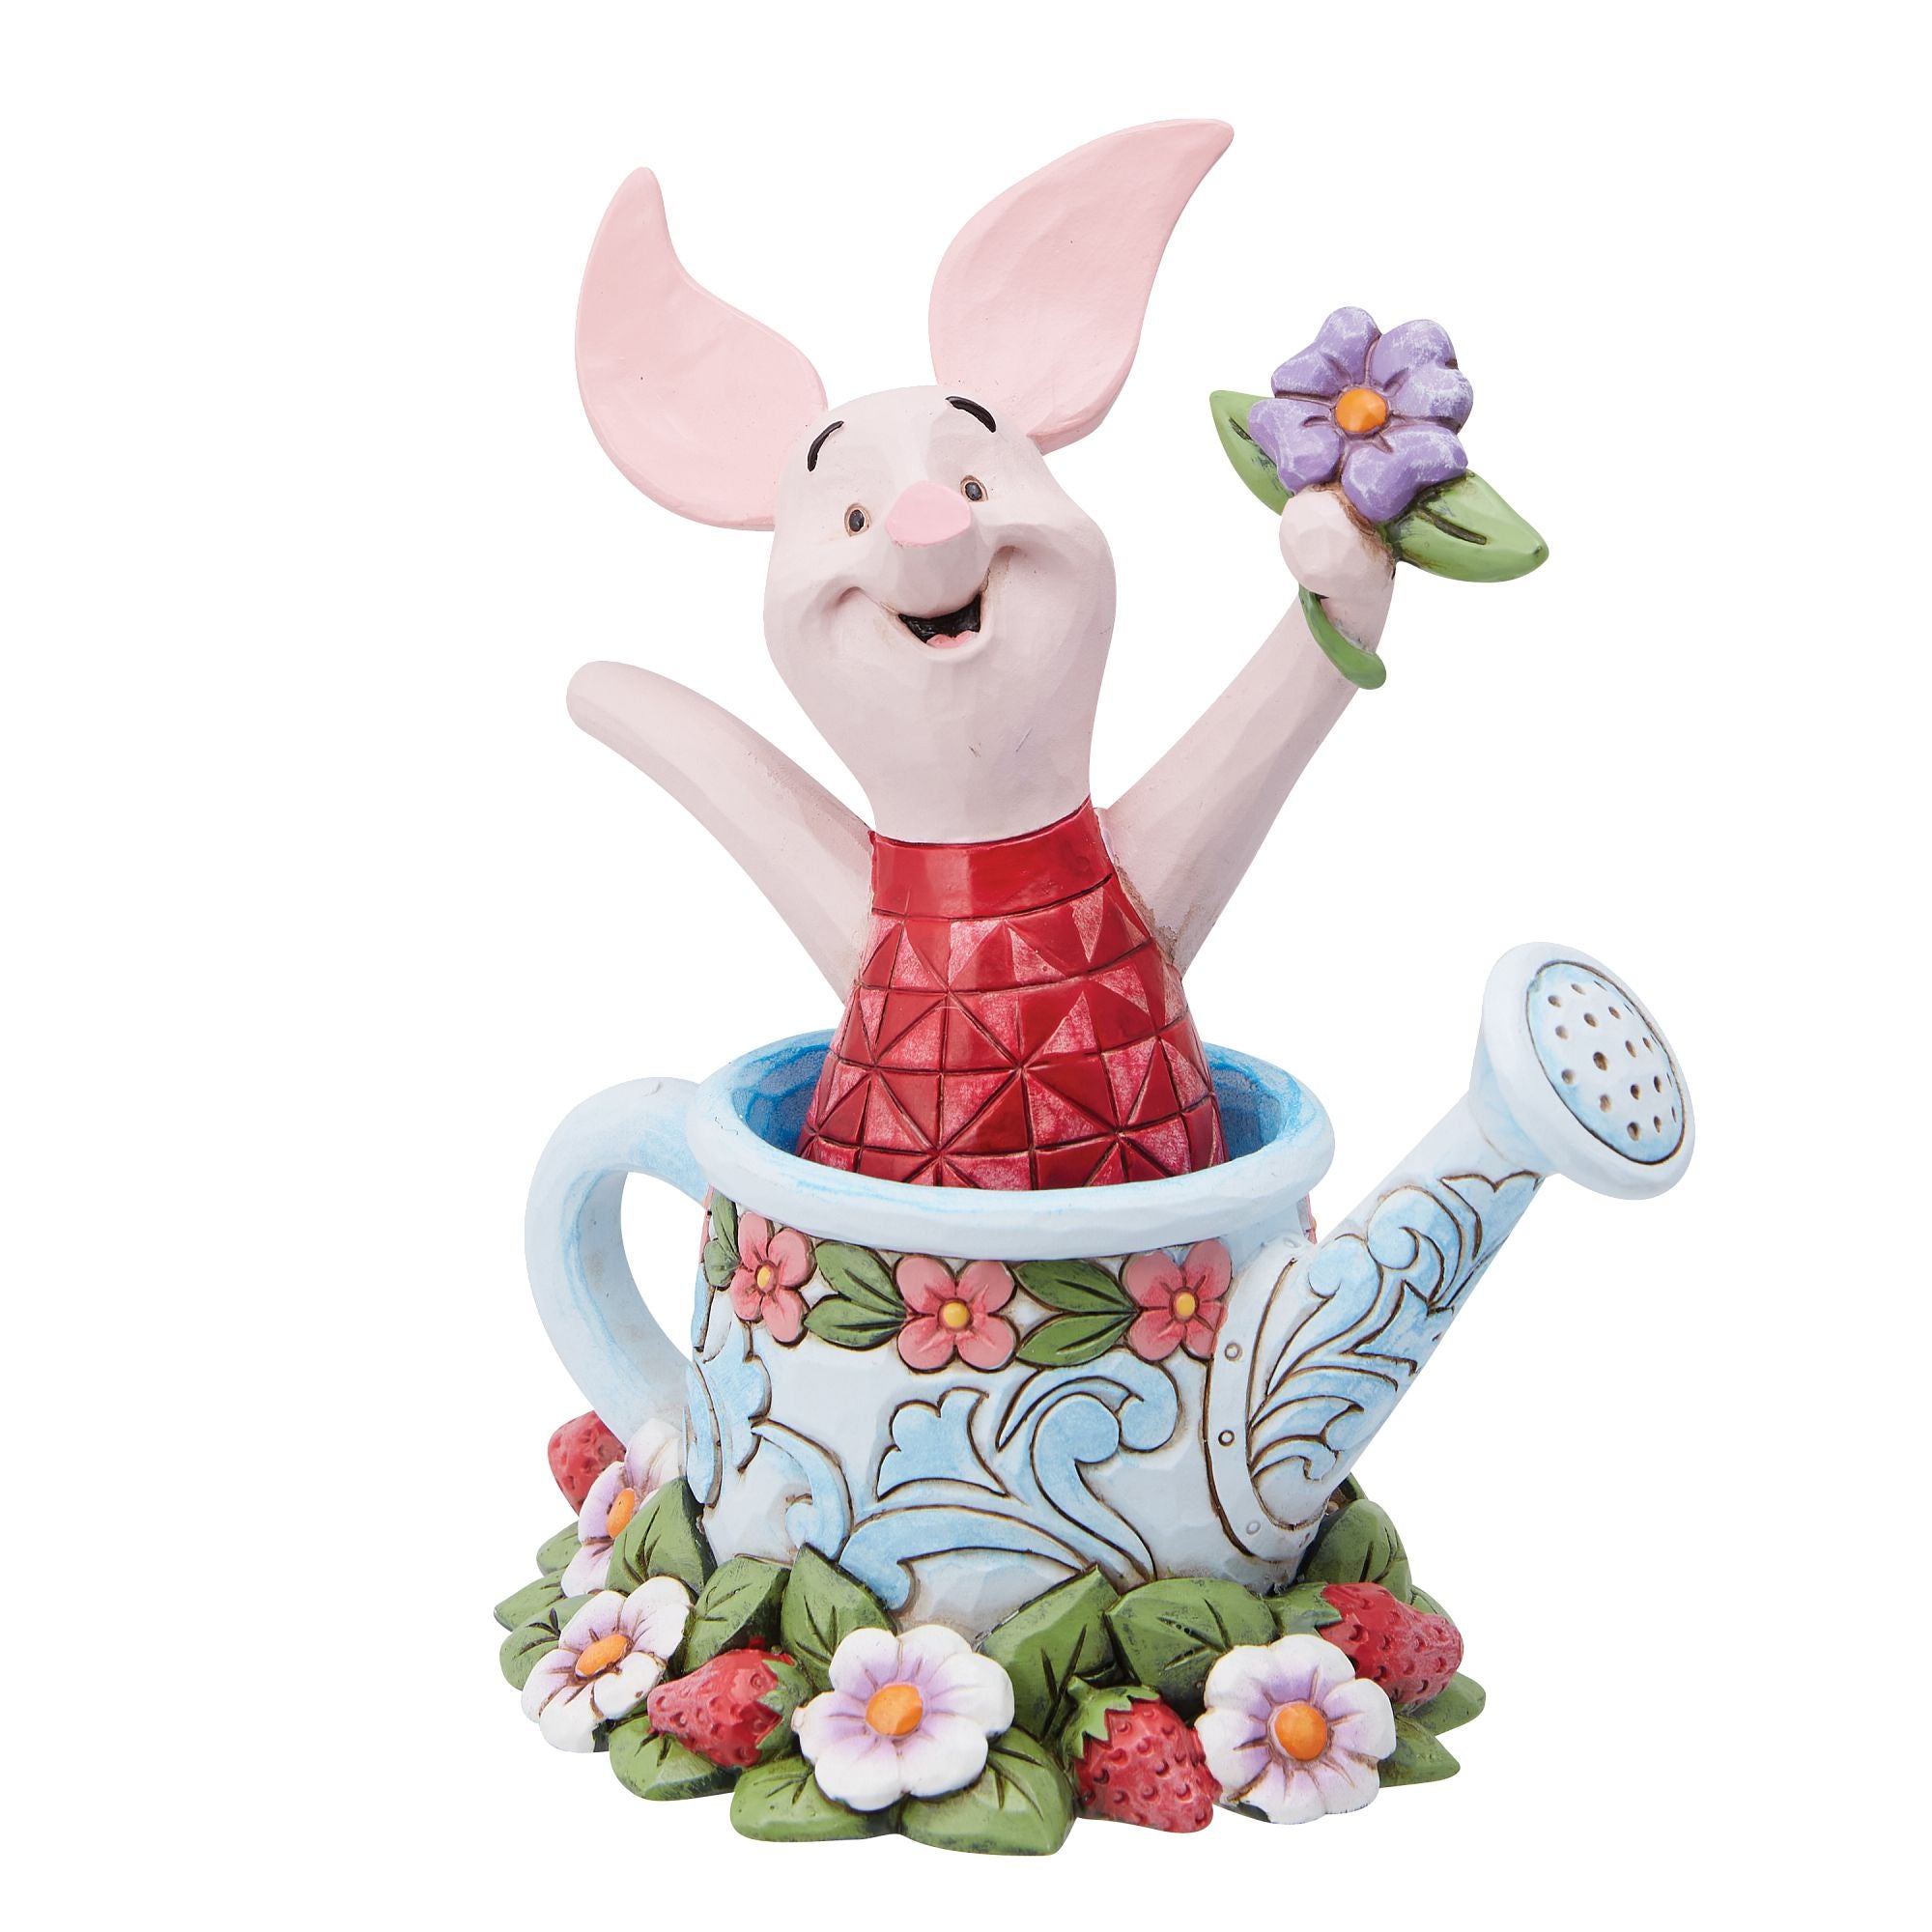 Jim Shore Beatrix Potter Peter Rabbit With Watering Can Figurine Free  Shipping